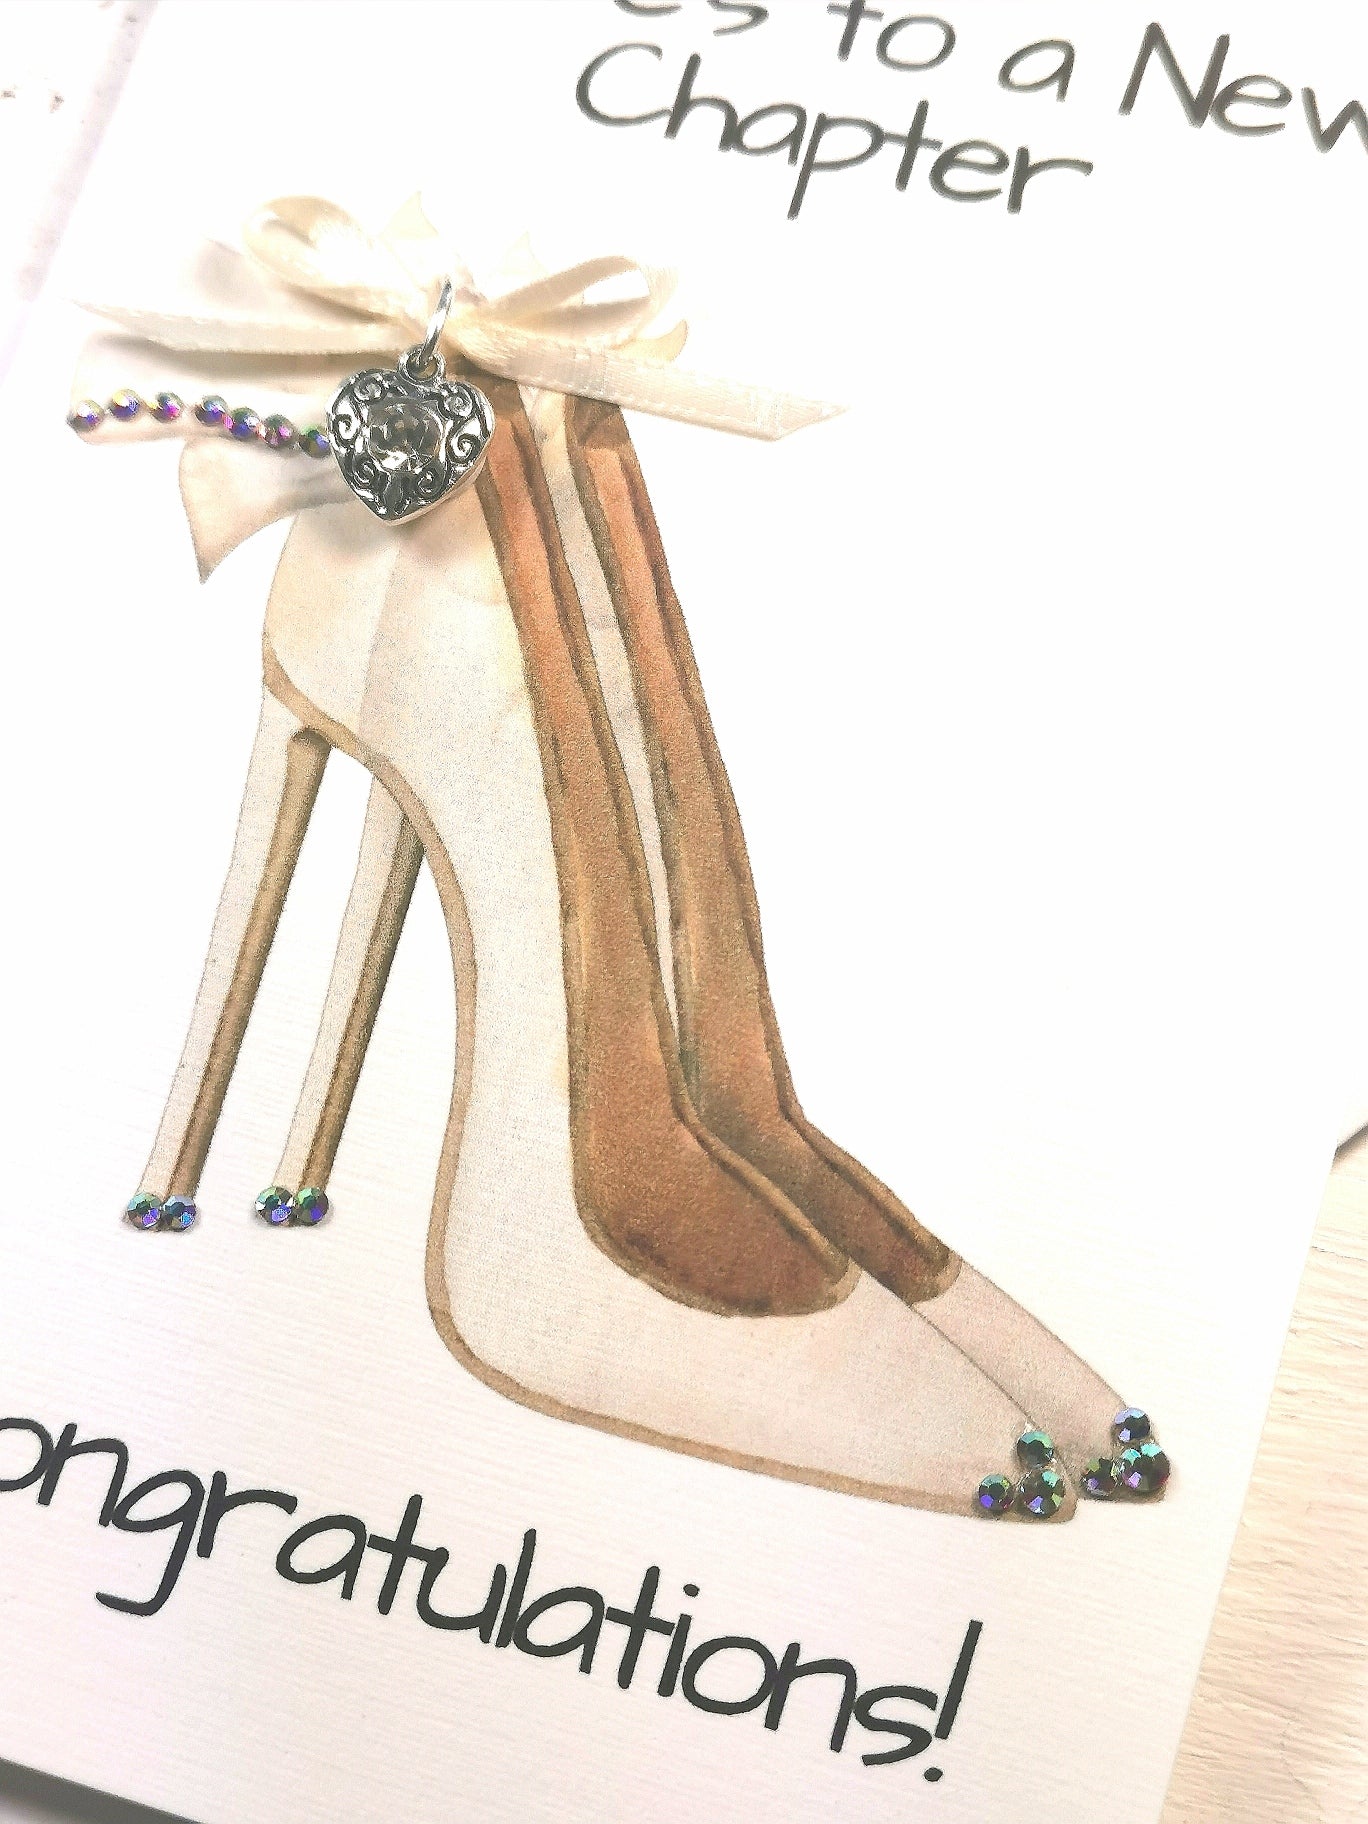 Congratulations High Heel Charm Embellished card | Here`s to a New Chapter Charm Card